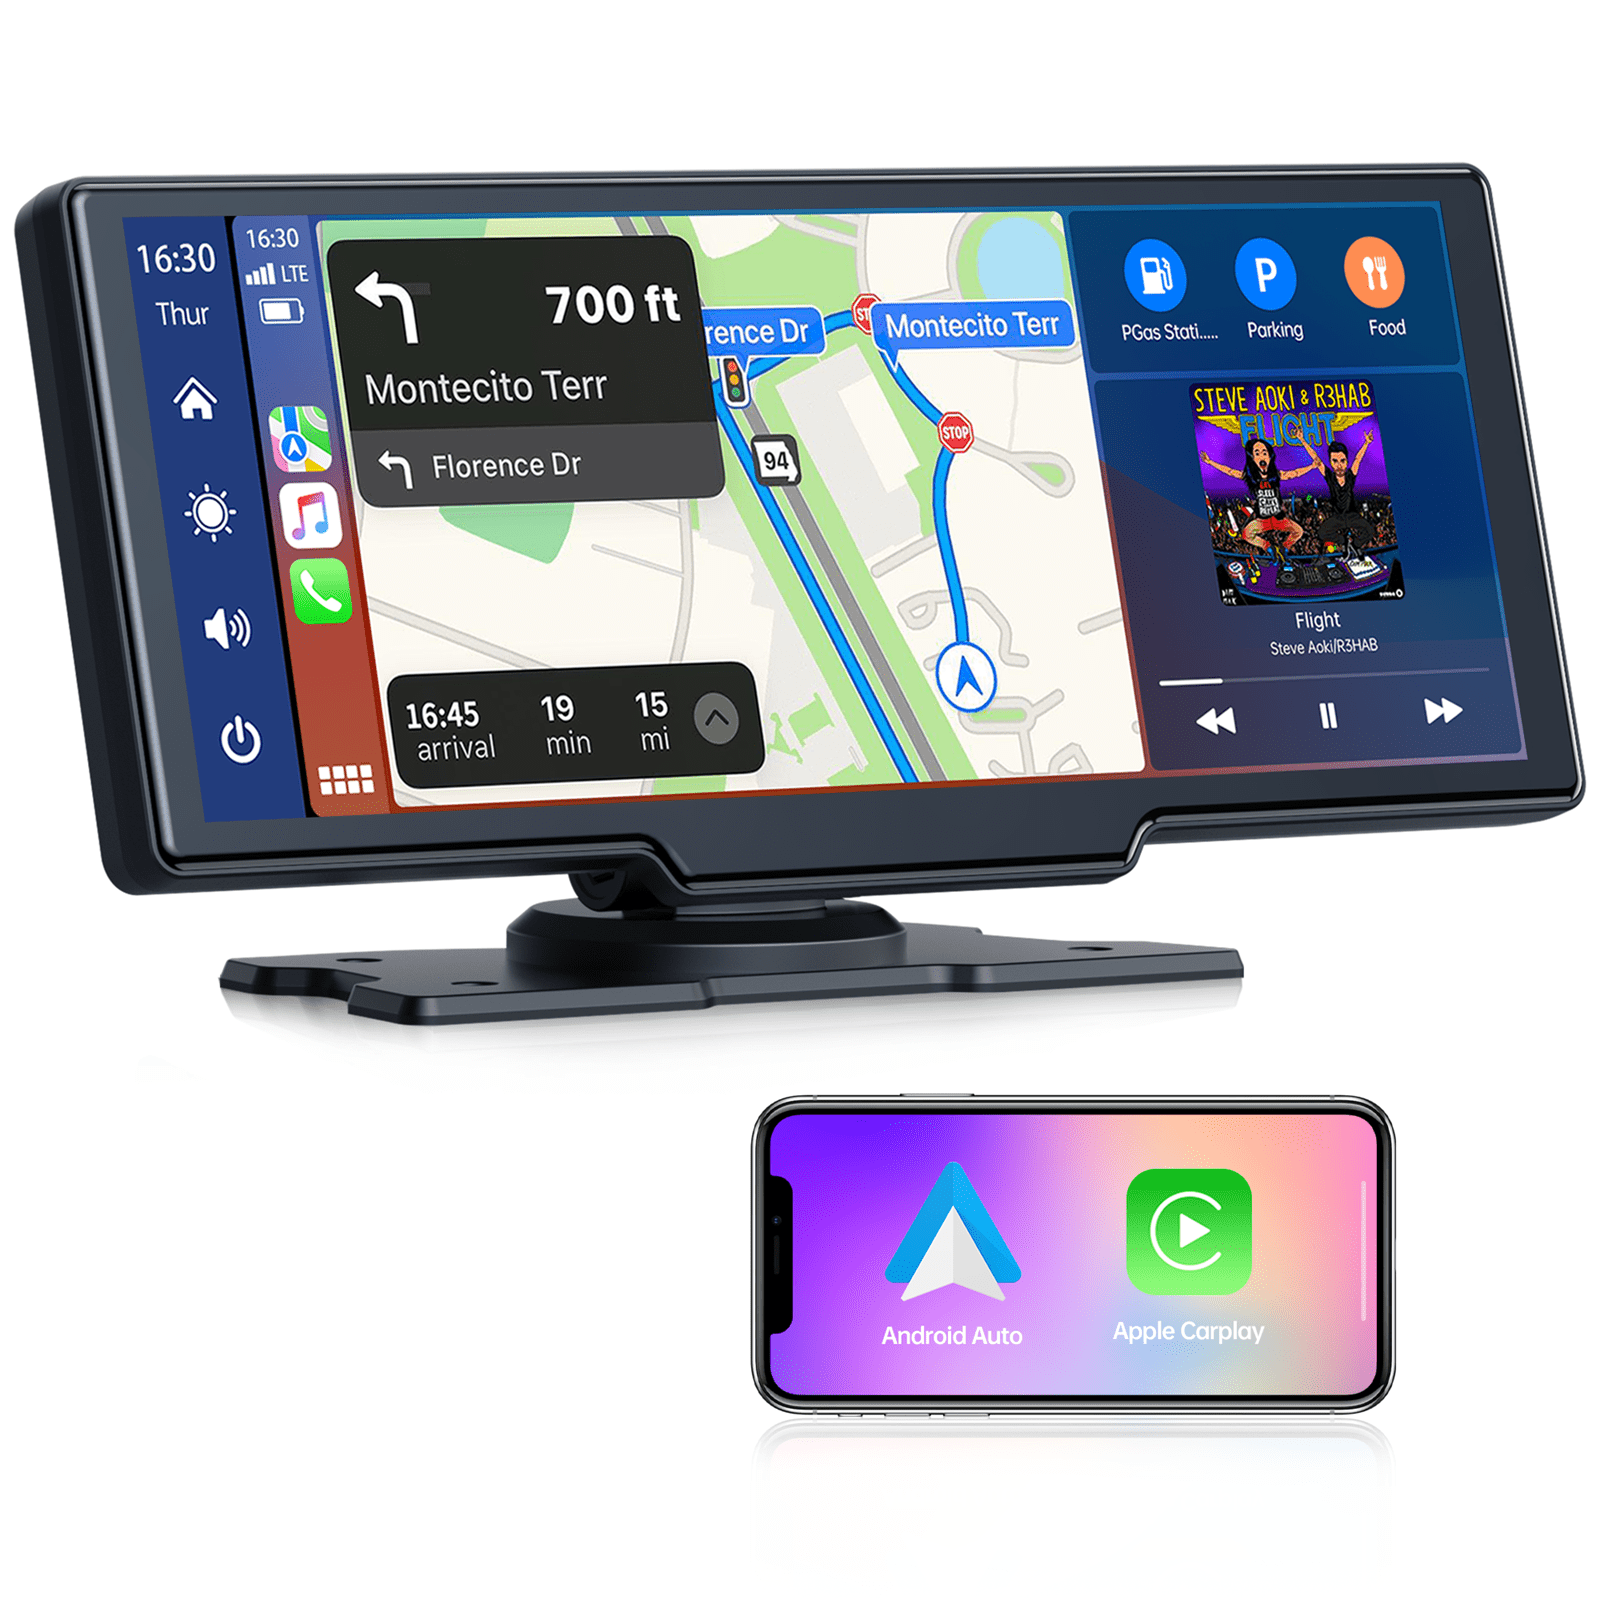 Car Stereo, Multimedia Receiver with Wireless or Wired Apple Carplay, Android  Auto,  Alexa, Hands-Free Bluetooth, Siriusxm Ready, Capacitive  Touchscreen - China Car Stereo, Car GPS